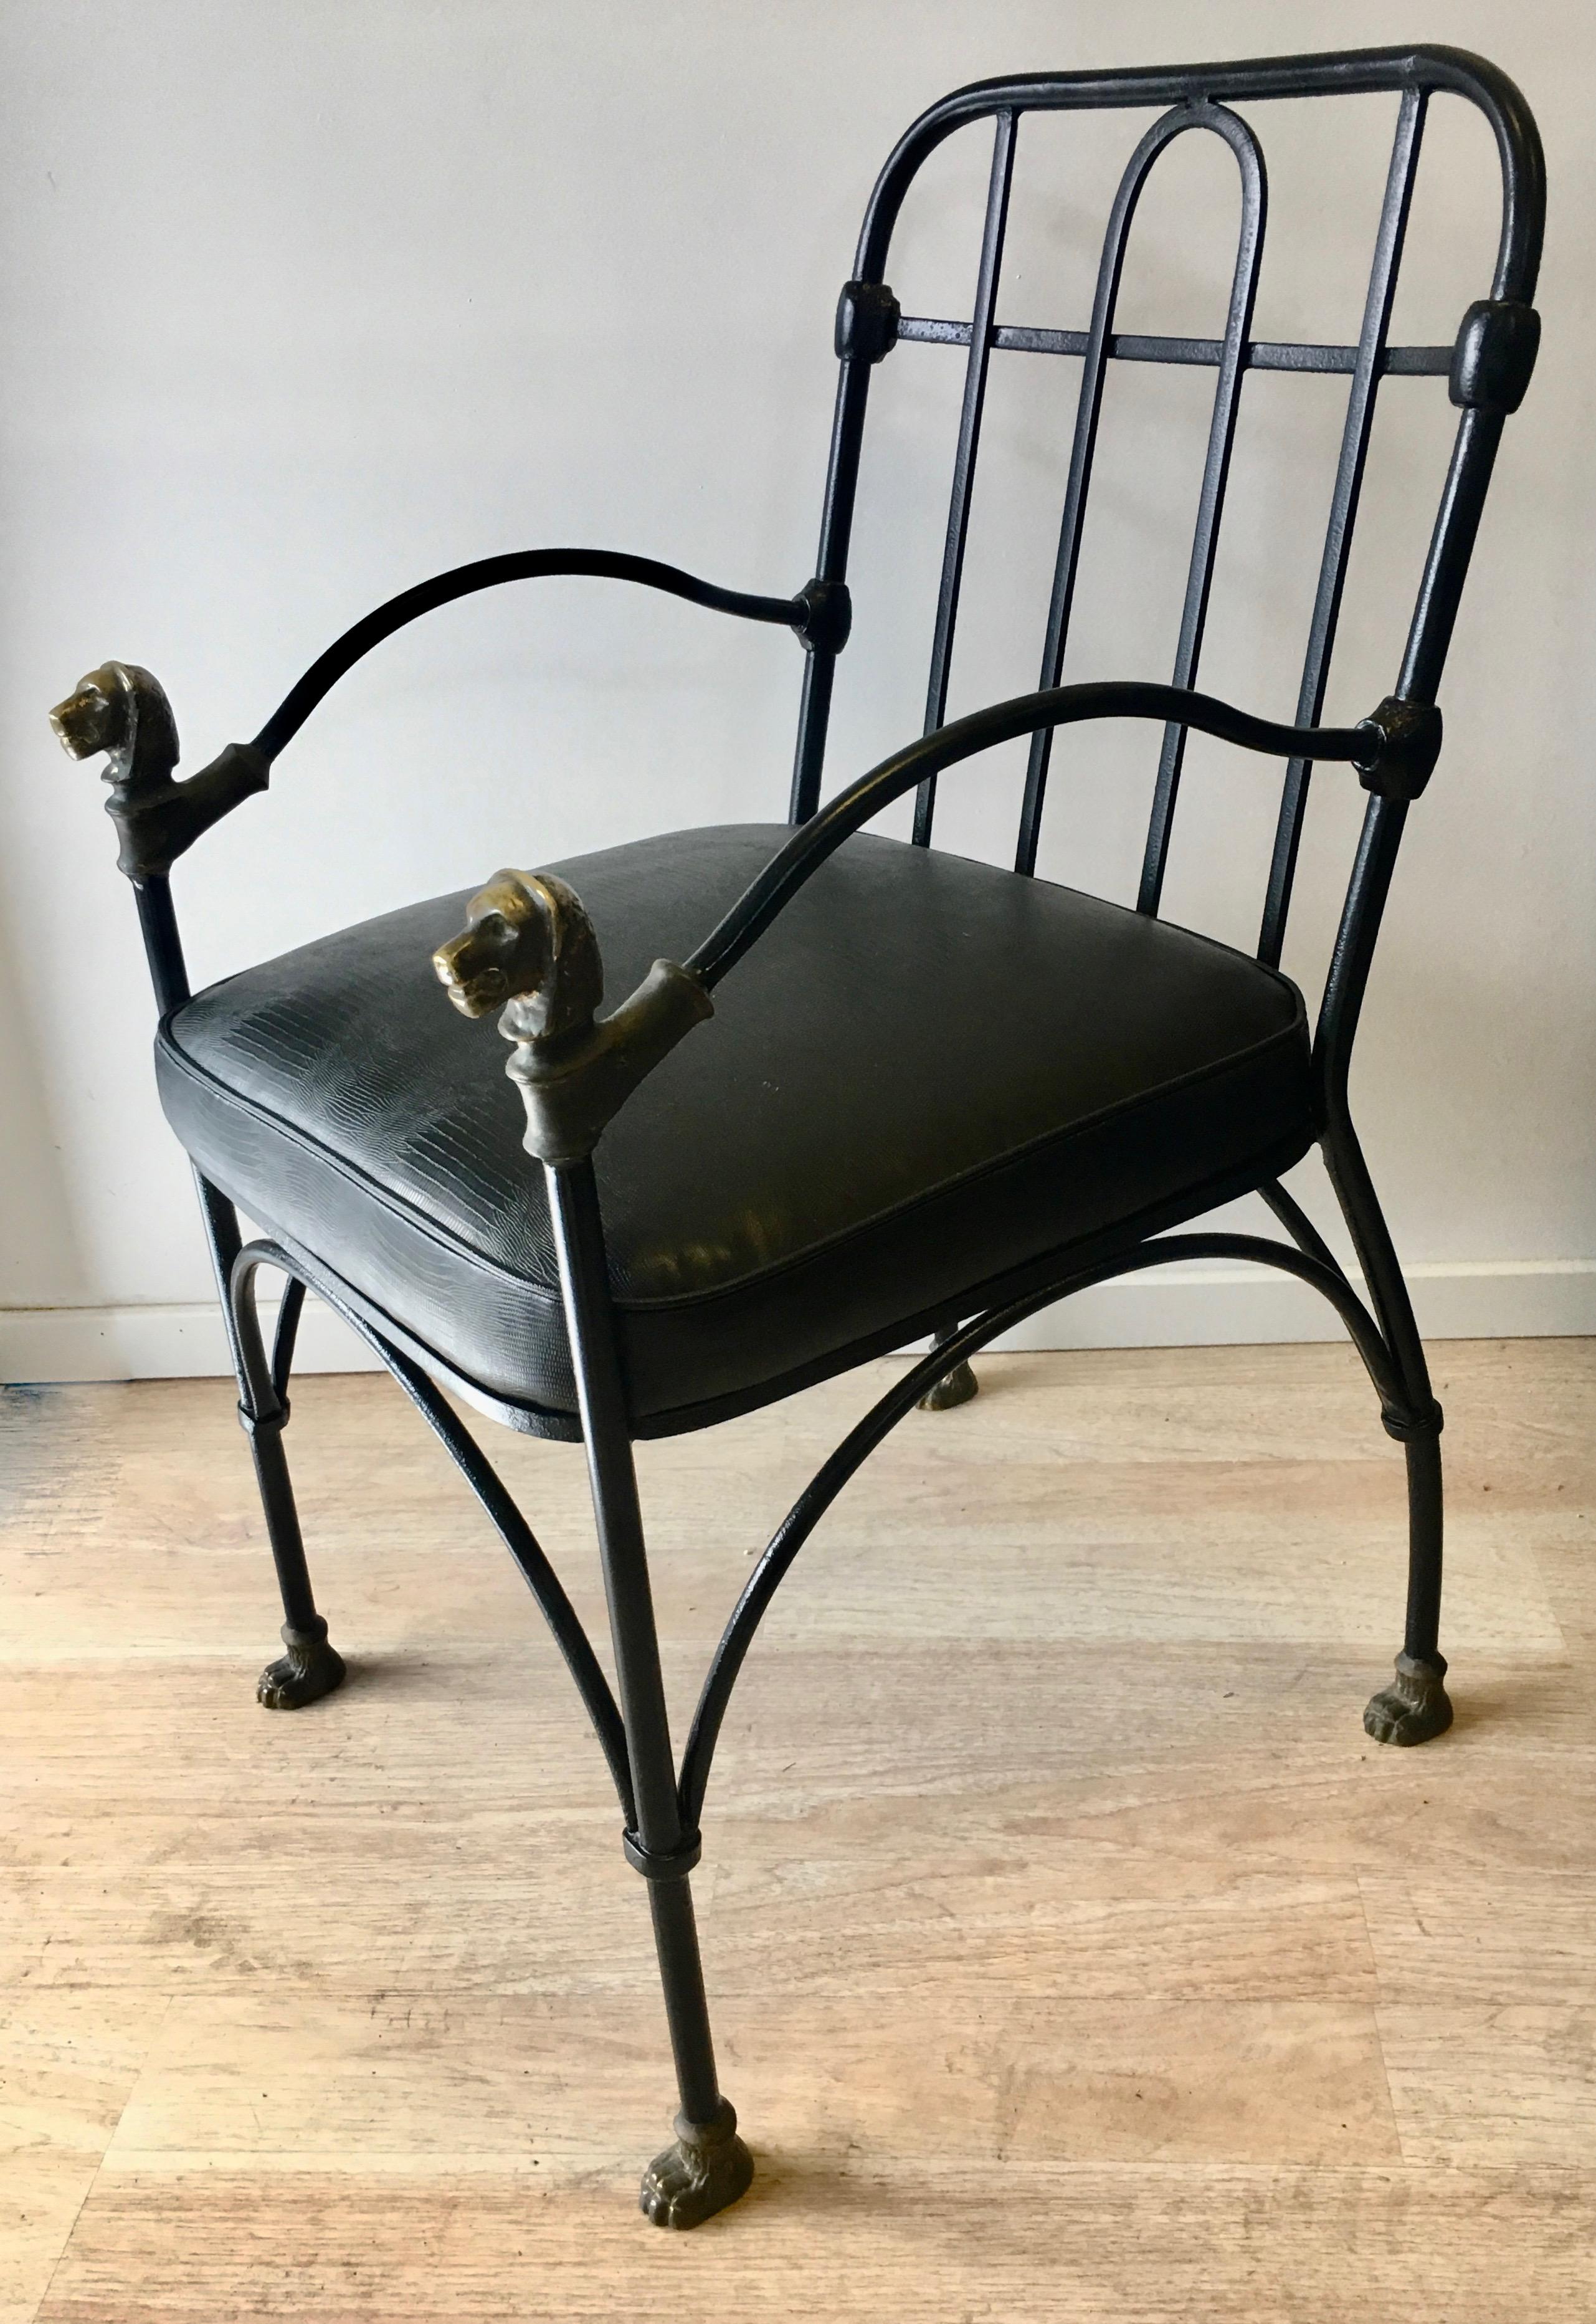 Wrought iron chair with bronze lion head detail - A handsome chair newly restored and upholstered - (If you have your own personal desired fabric, the seat is easily re-upholstered to your decor) - The wrought iron, in the manner of Italian artist